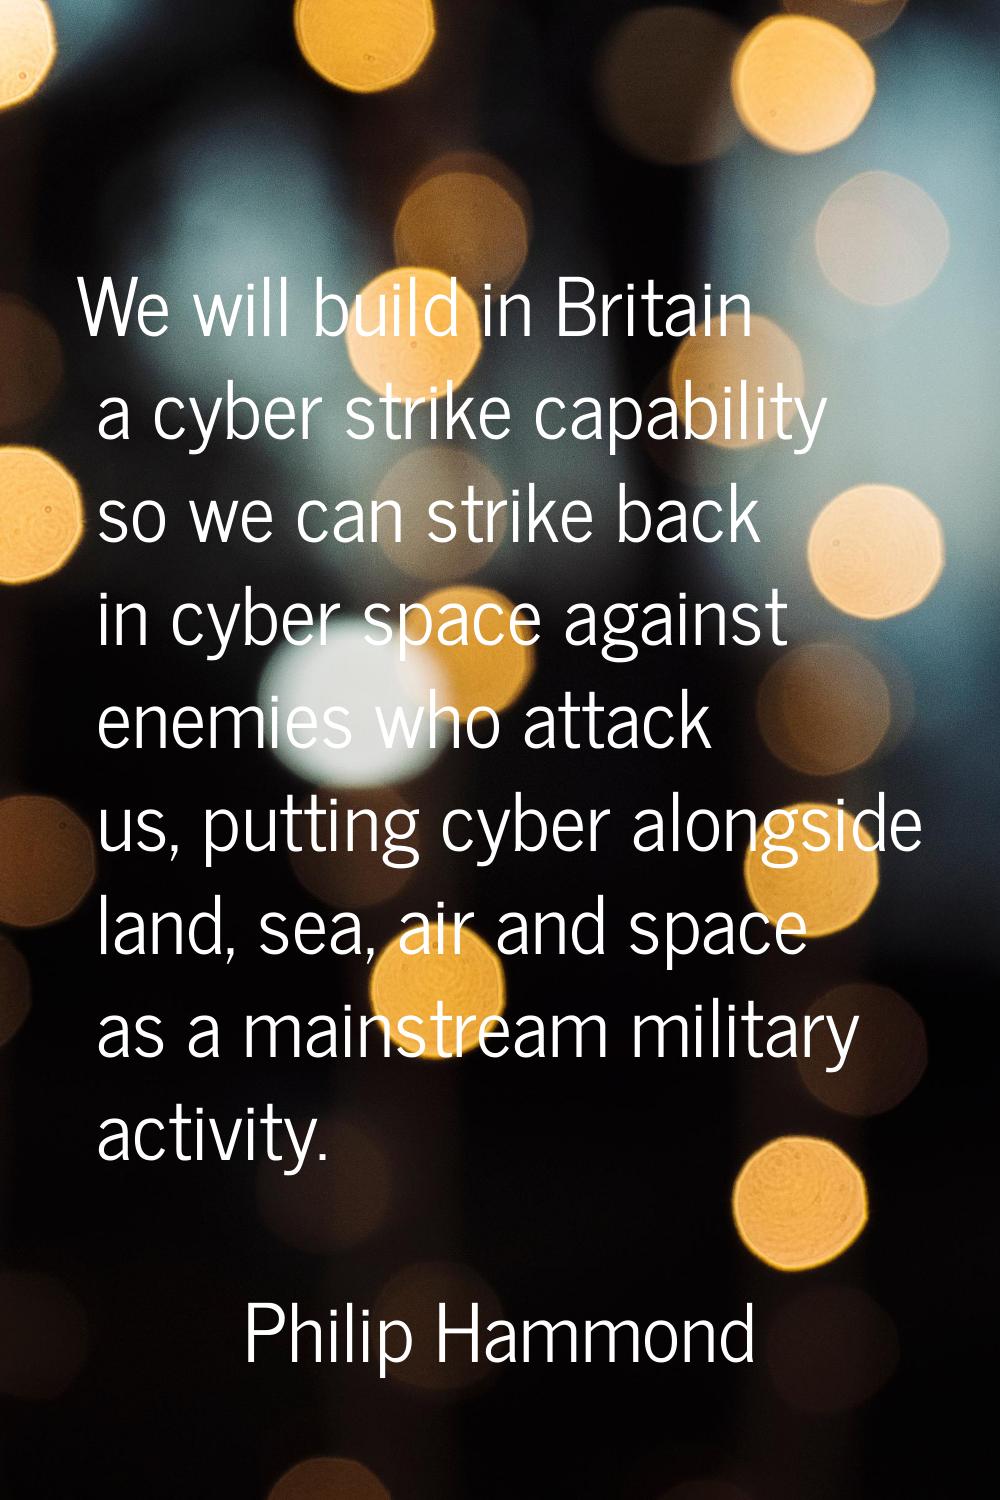 We will build in Britain a cyber strike capability so we can strike back in cyber space against ene